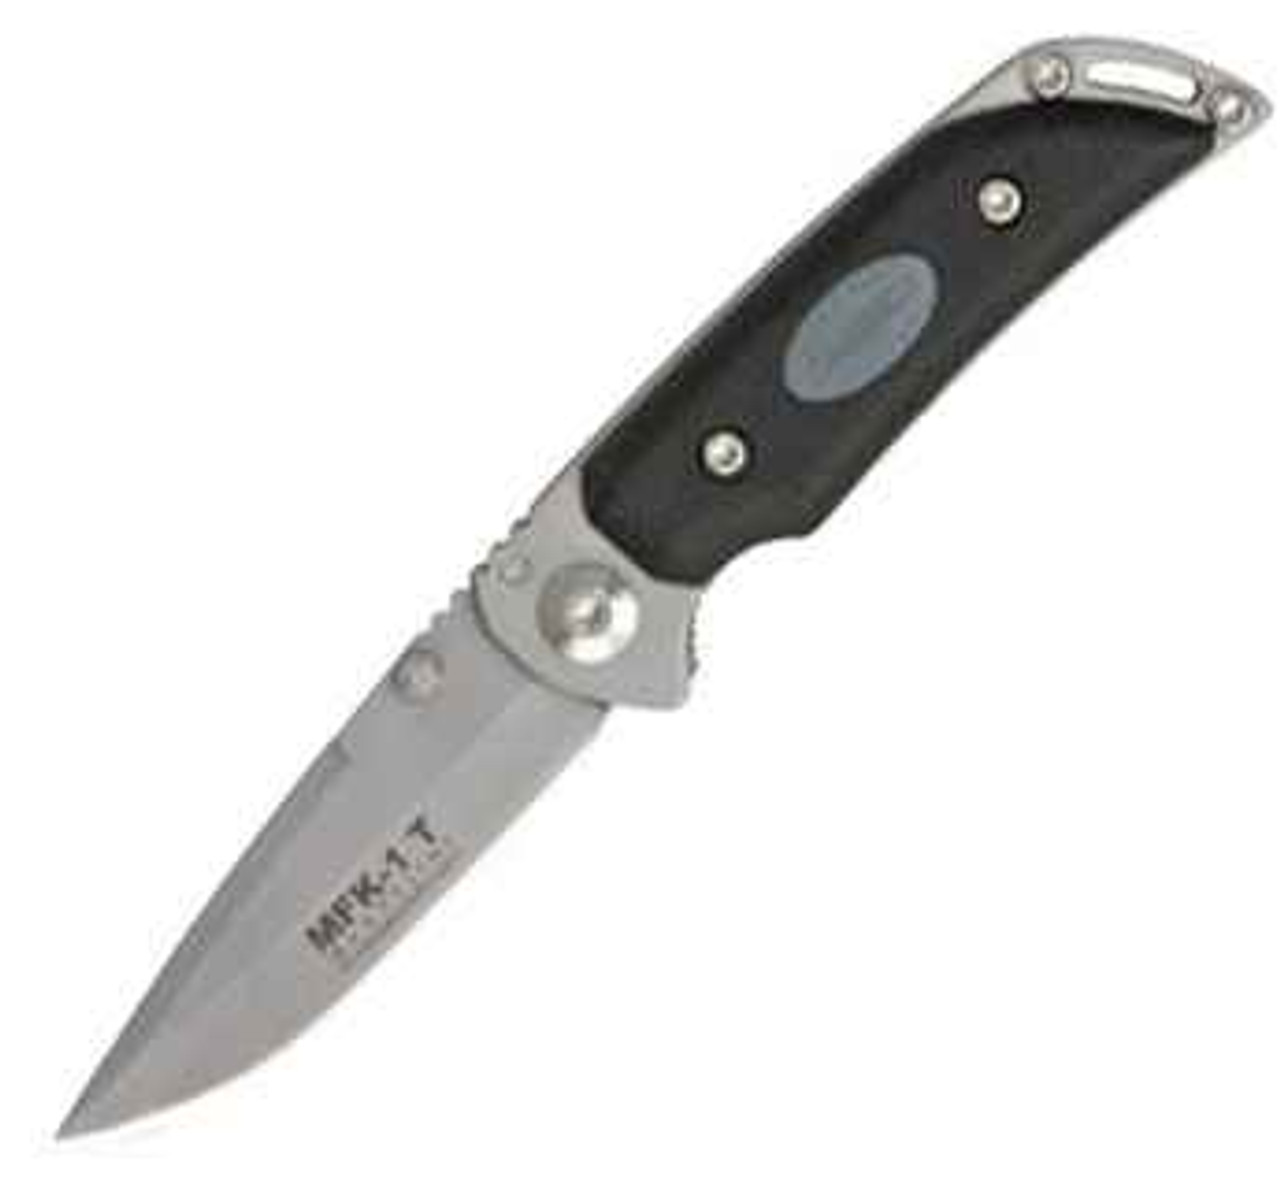 Marttiini Small Folder MFK-1T, Matte Finish Stainless Frame w/ FRN/TPE Injection Molded Handle Scales